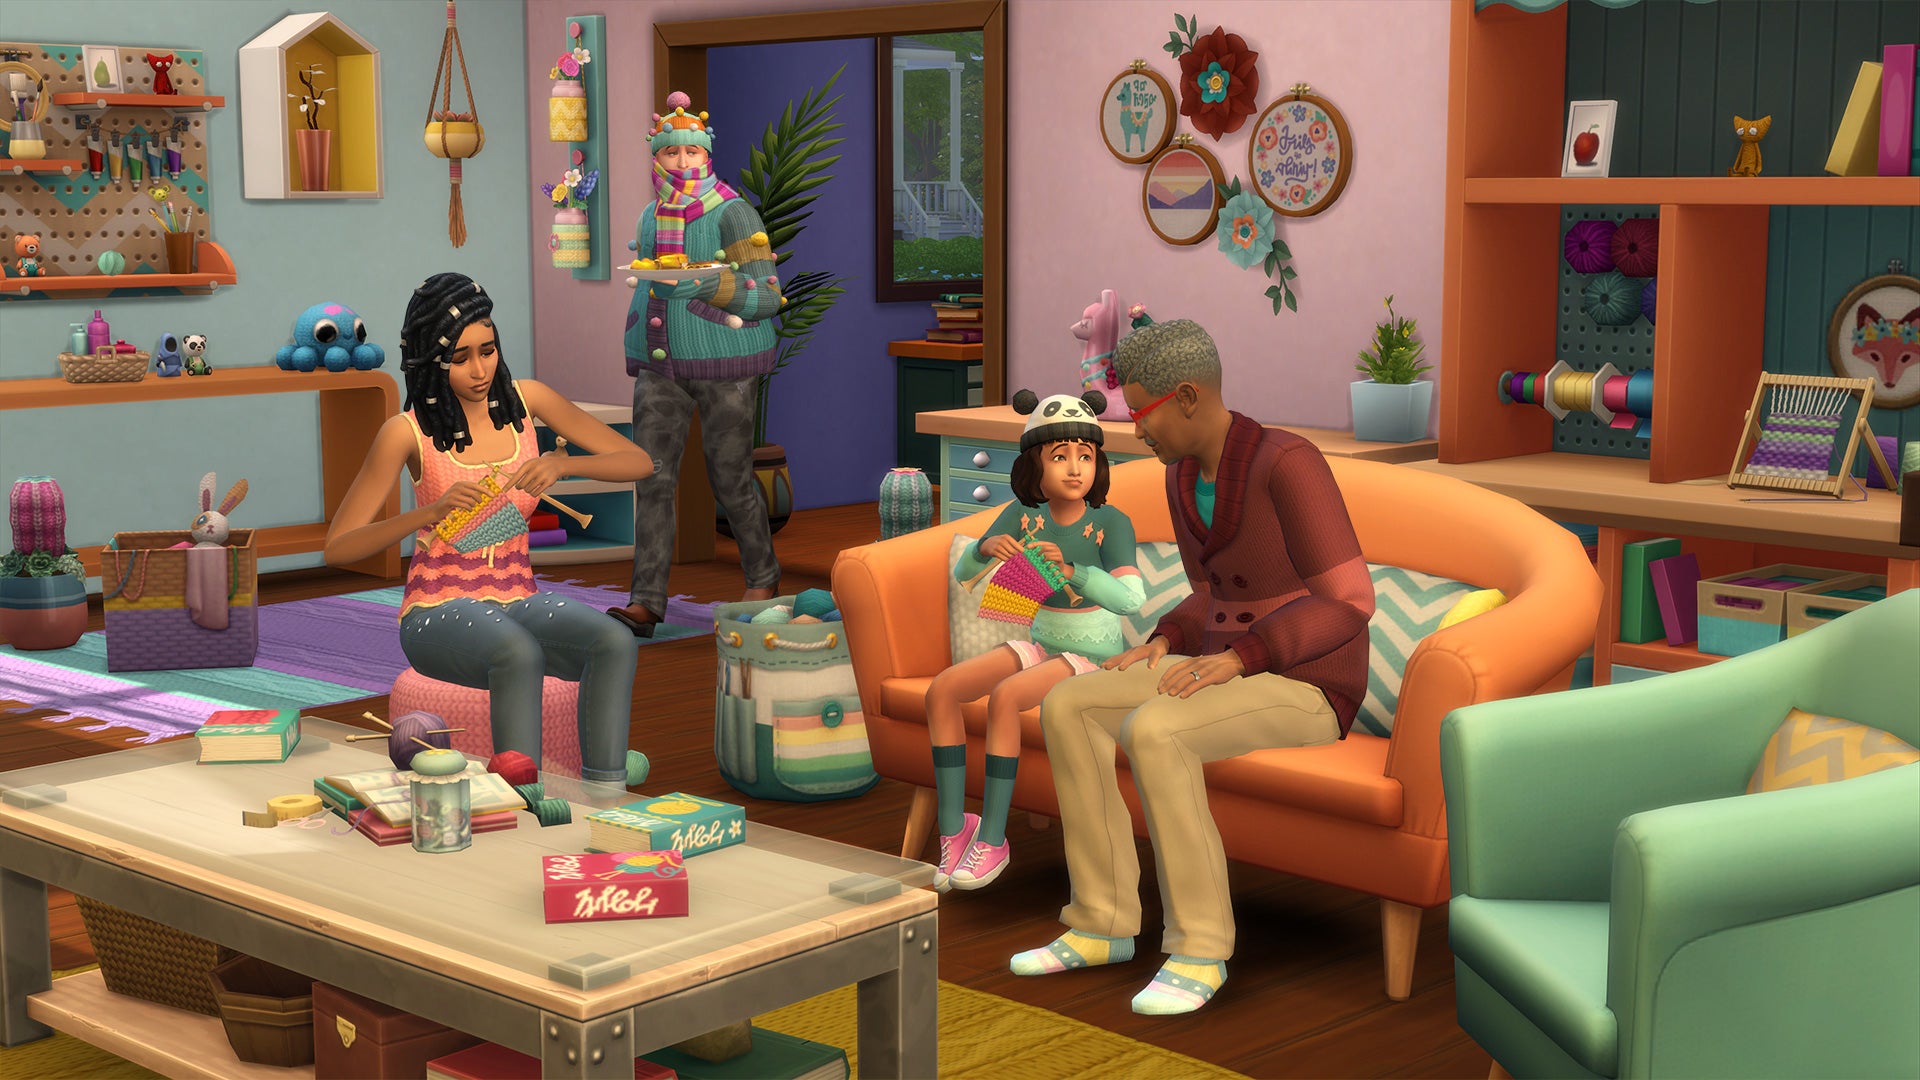 A group of Sims sitting in a living room knitting. One Sim is swathed in knitwear to the point of struggling to move.